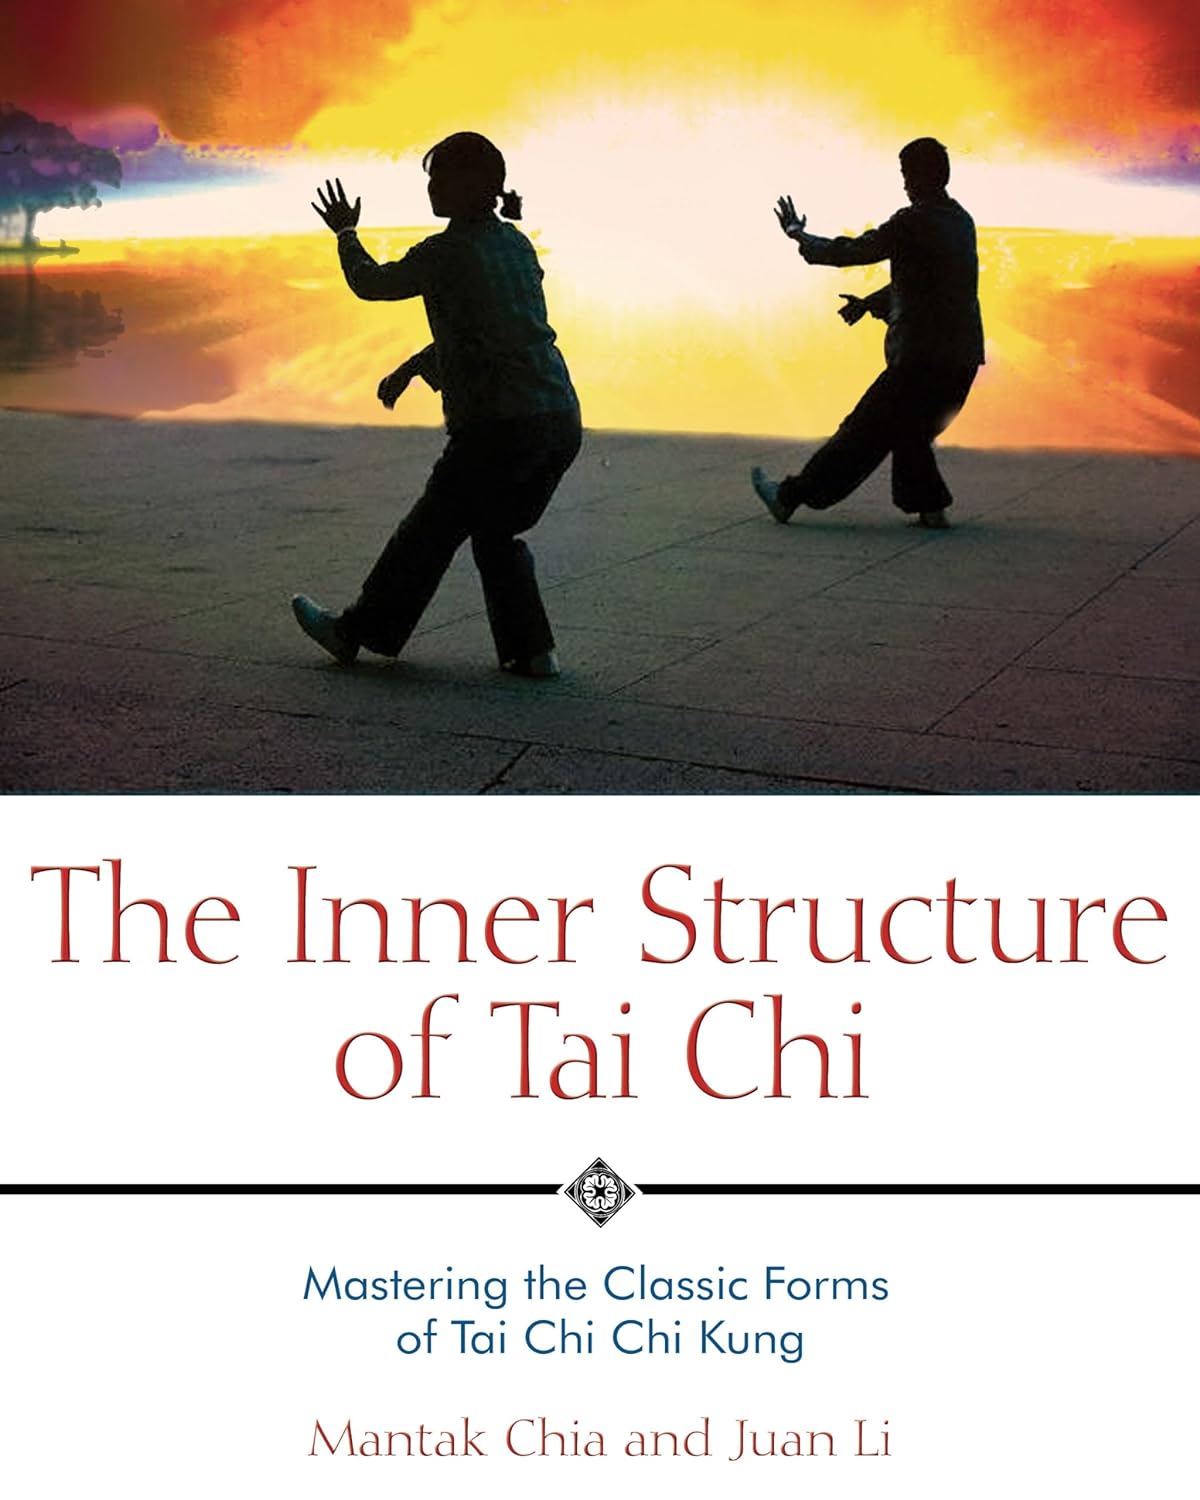 Inner Structure of Tai Chi: Tai Chi & Chi Kung book by Mantak Chia (Preowned)